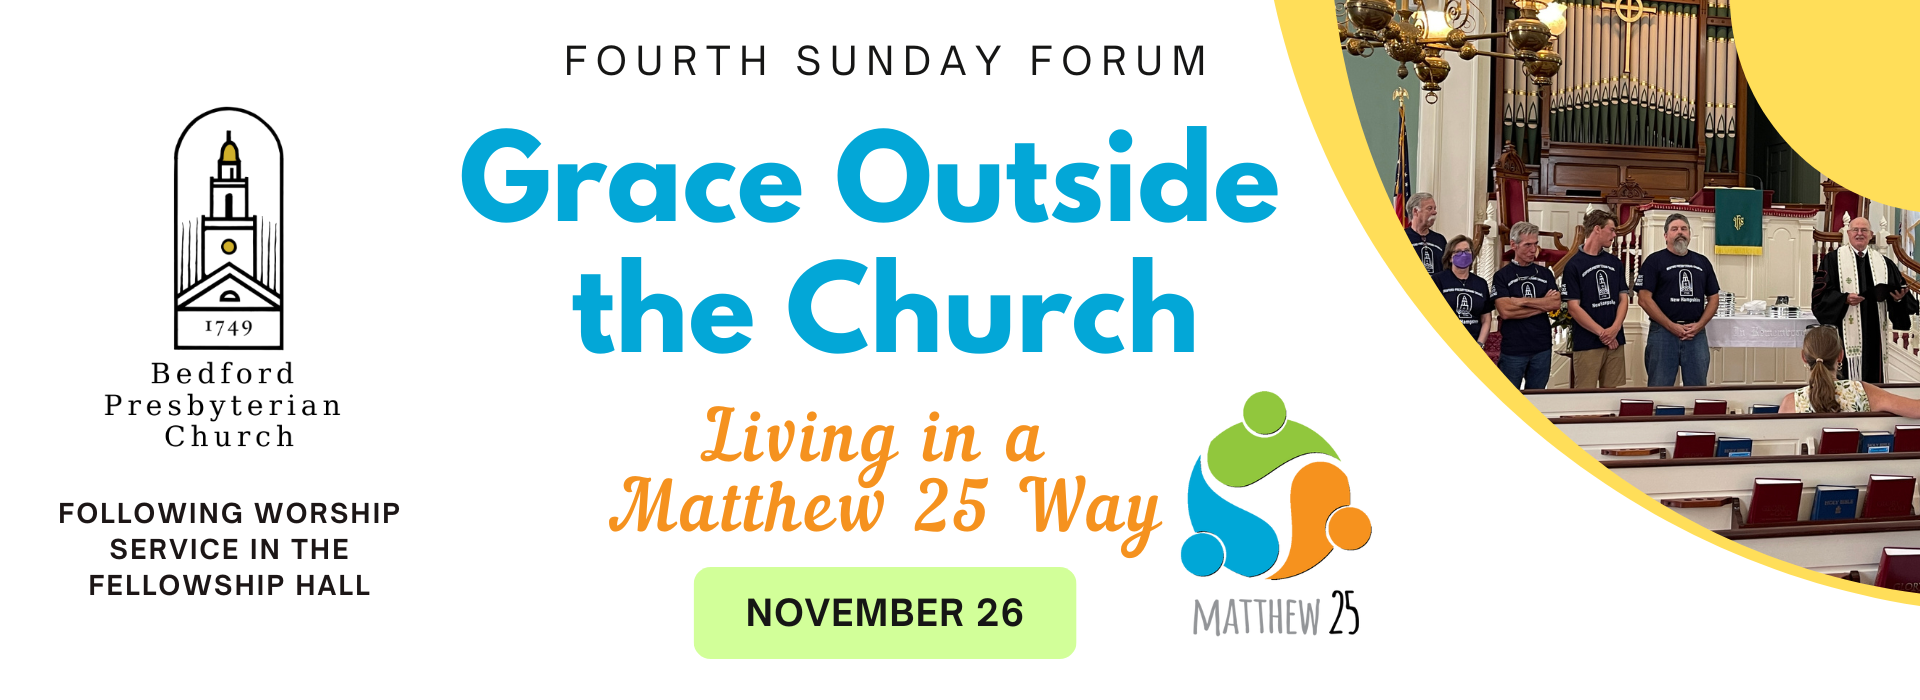 4th Sunday Forum - Grace Outside the Church: Living in a Matthew 25 Way